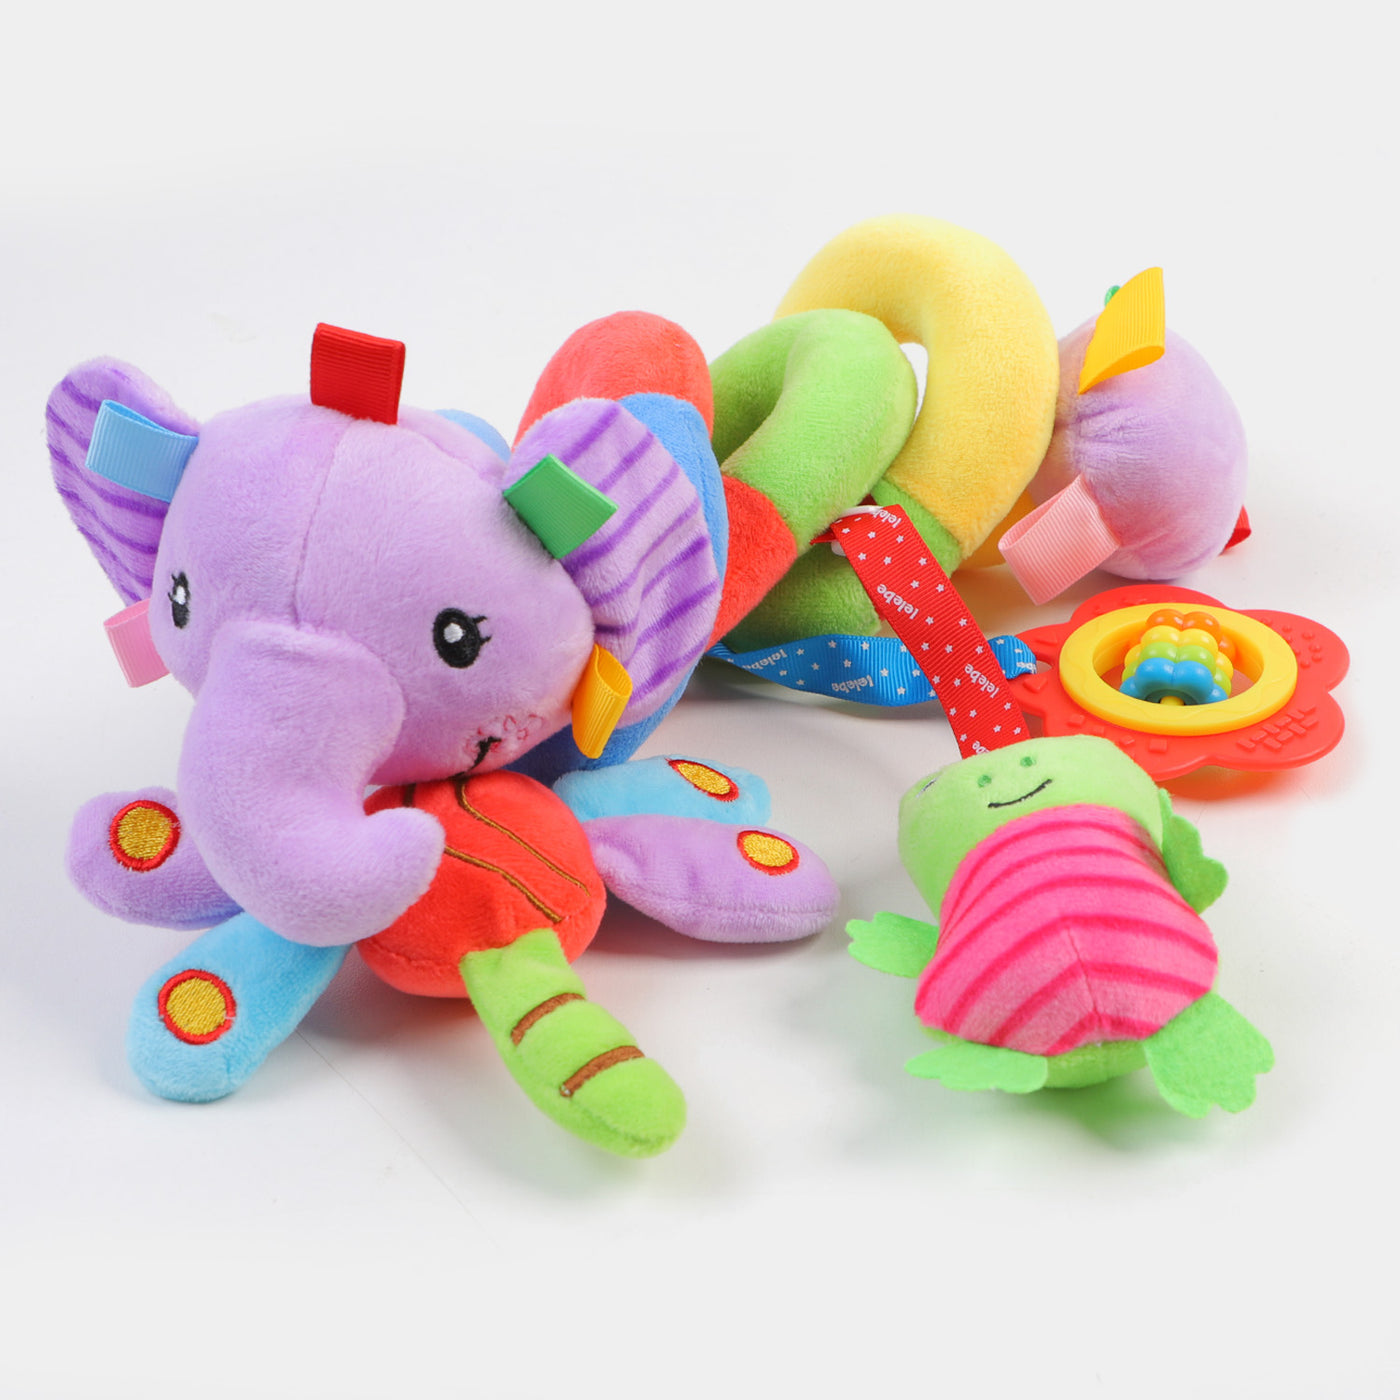 Baby Cot Mobile - Elephant